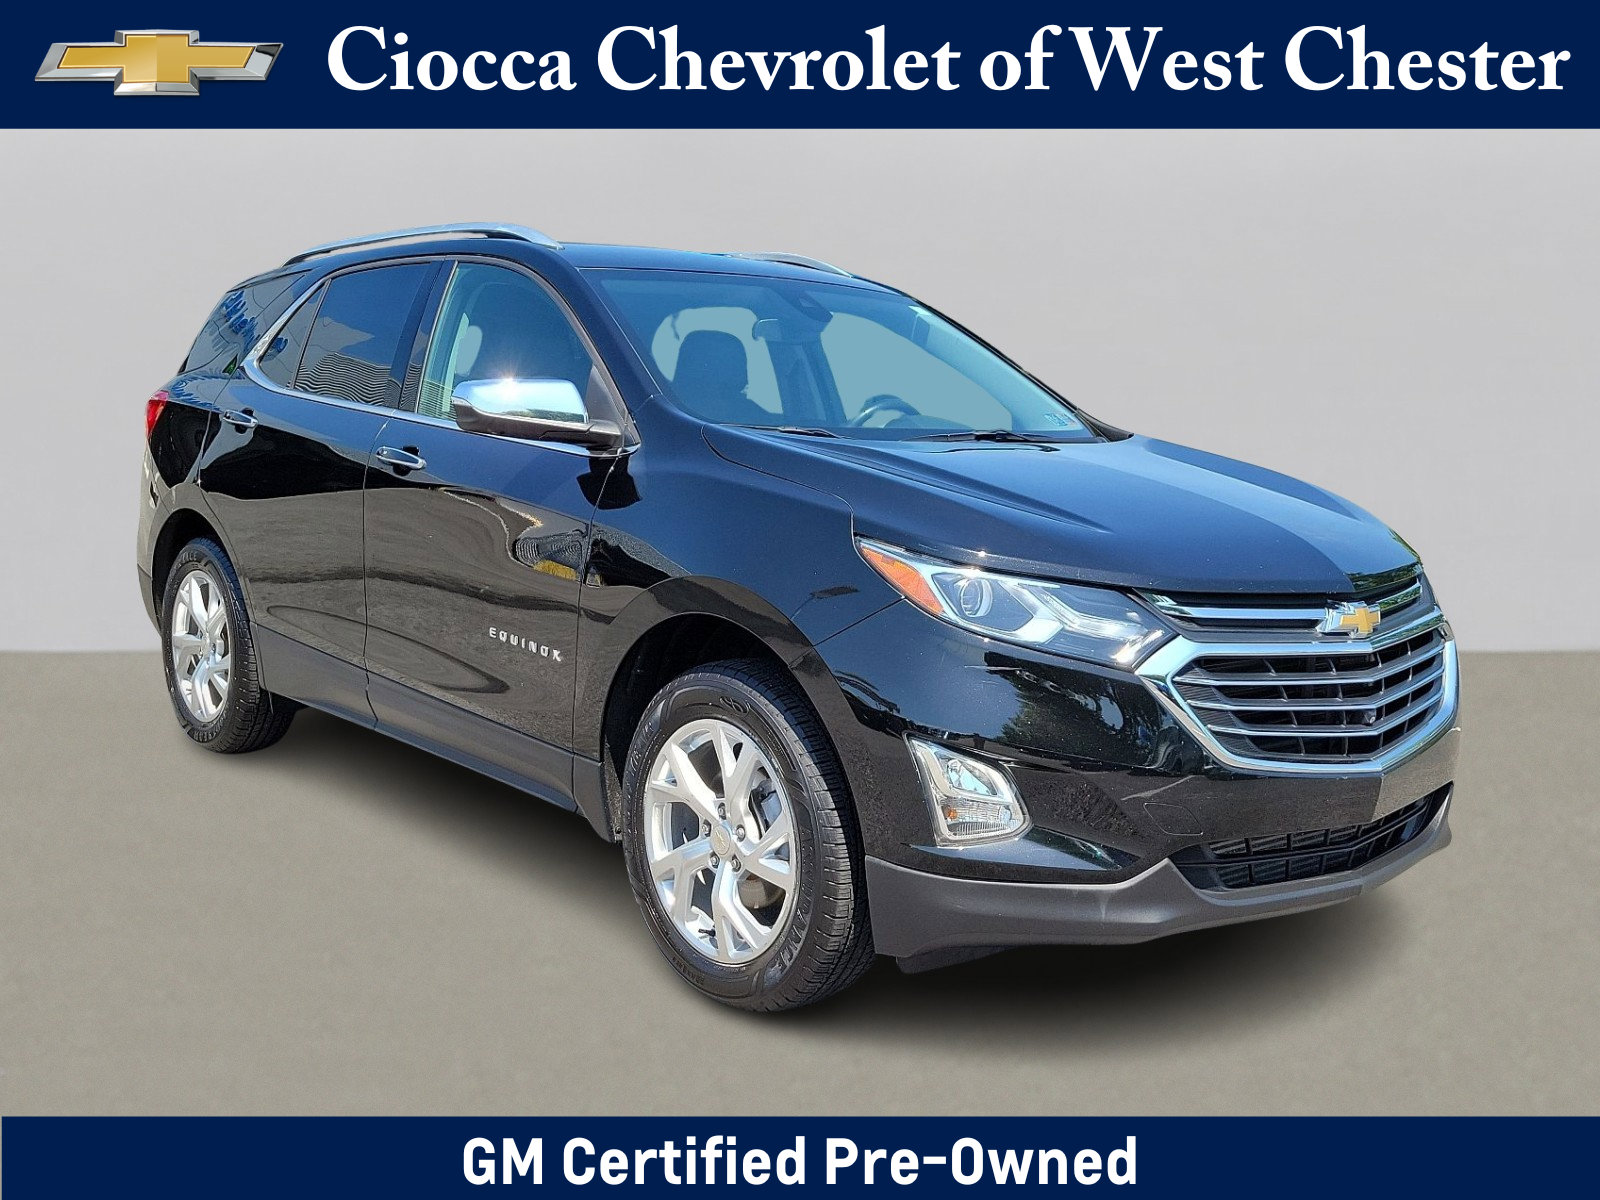 2019 Chevrolet Equinox West Chester PA